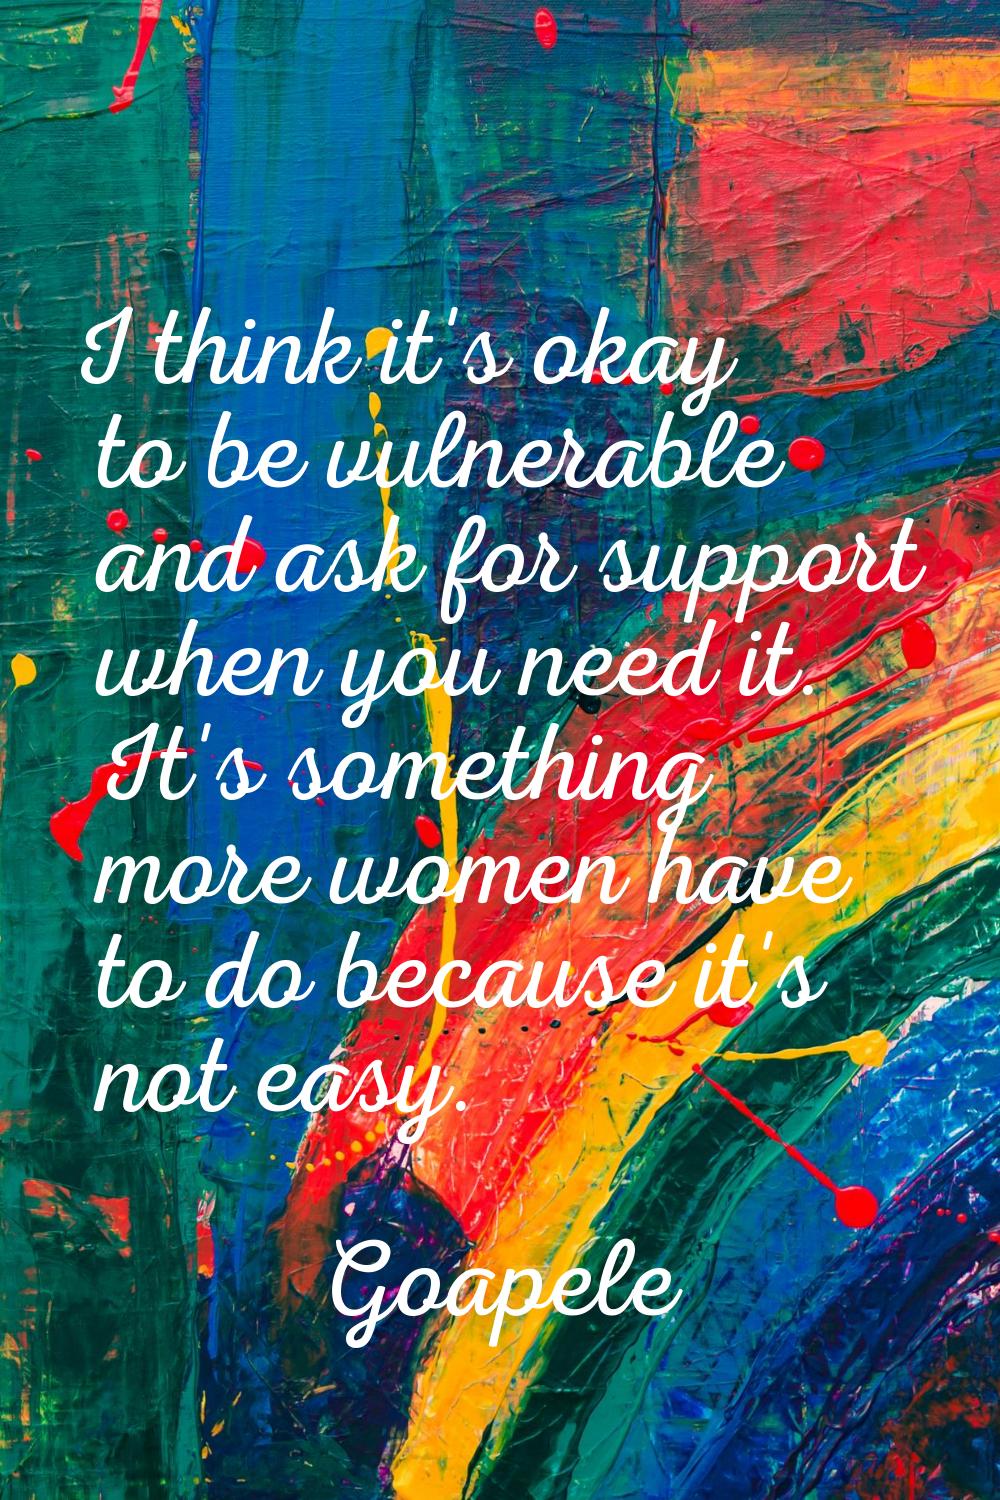 I think it's okay to be vulnerable and ask for support when you need it. It's something more women 